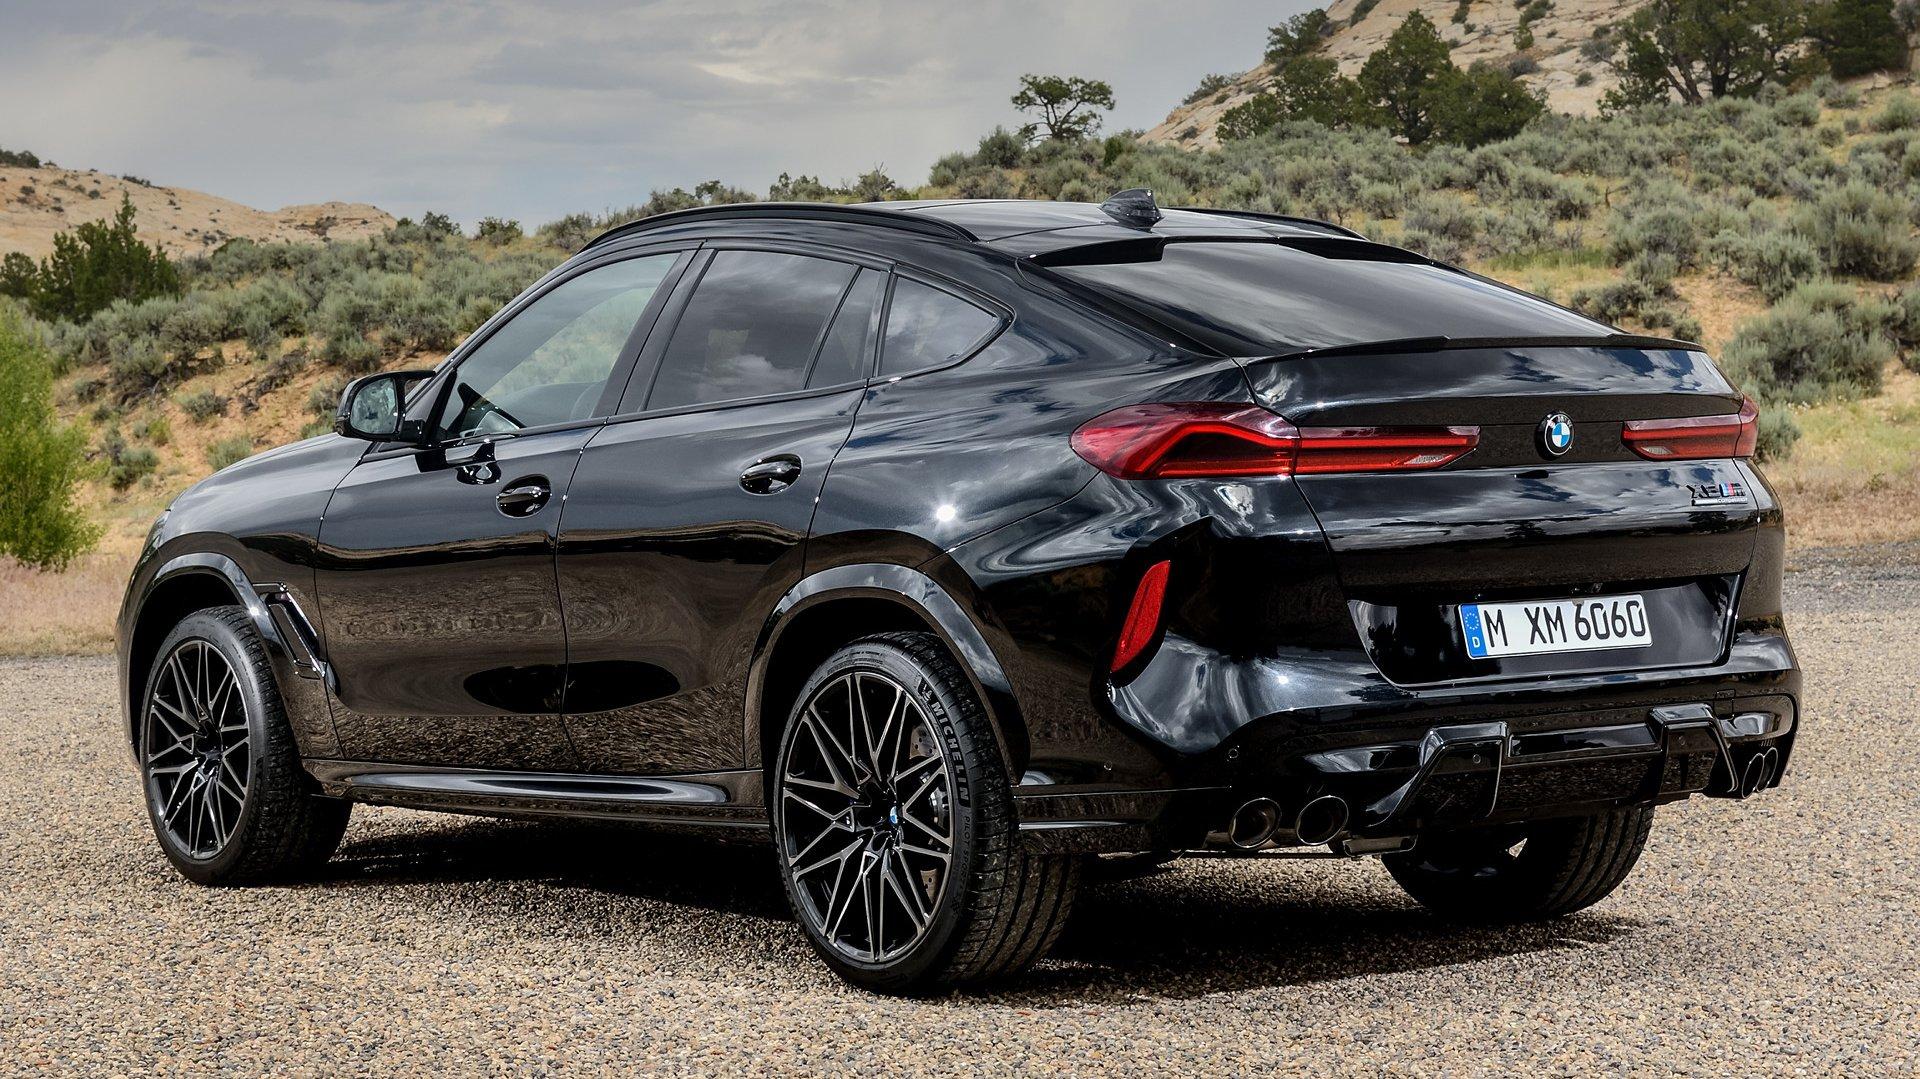  BMW X6 M Competition